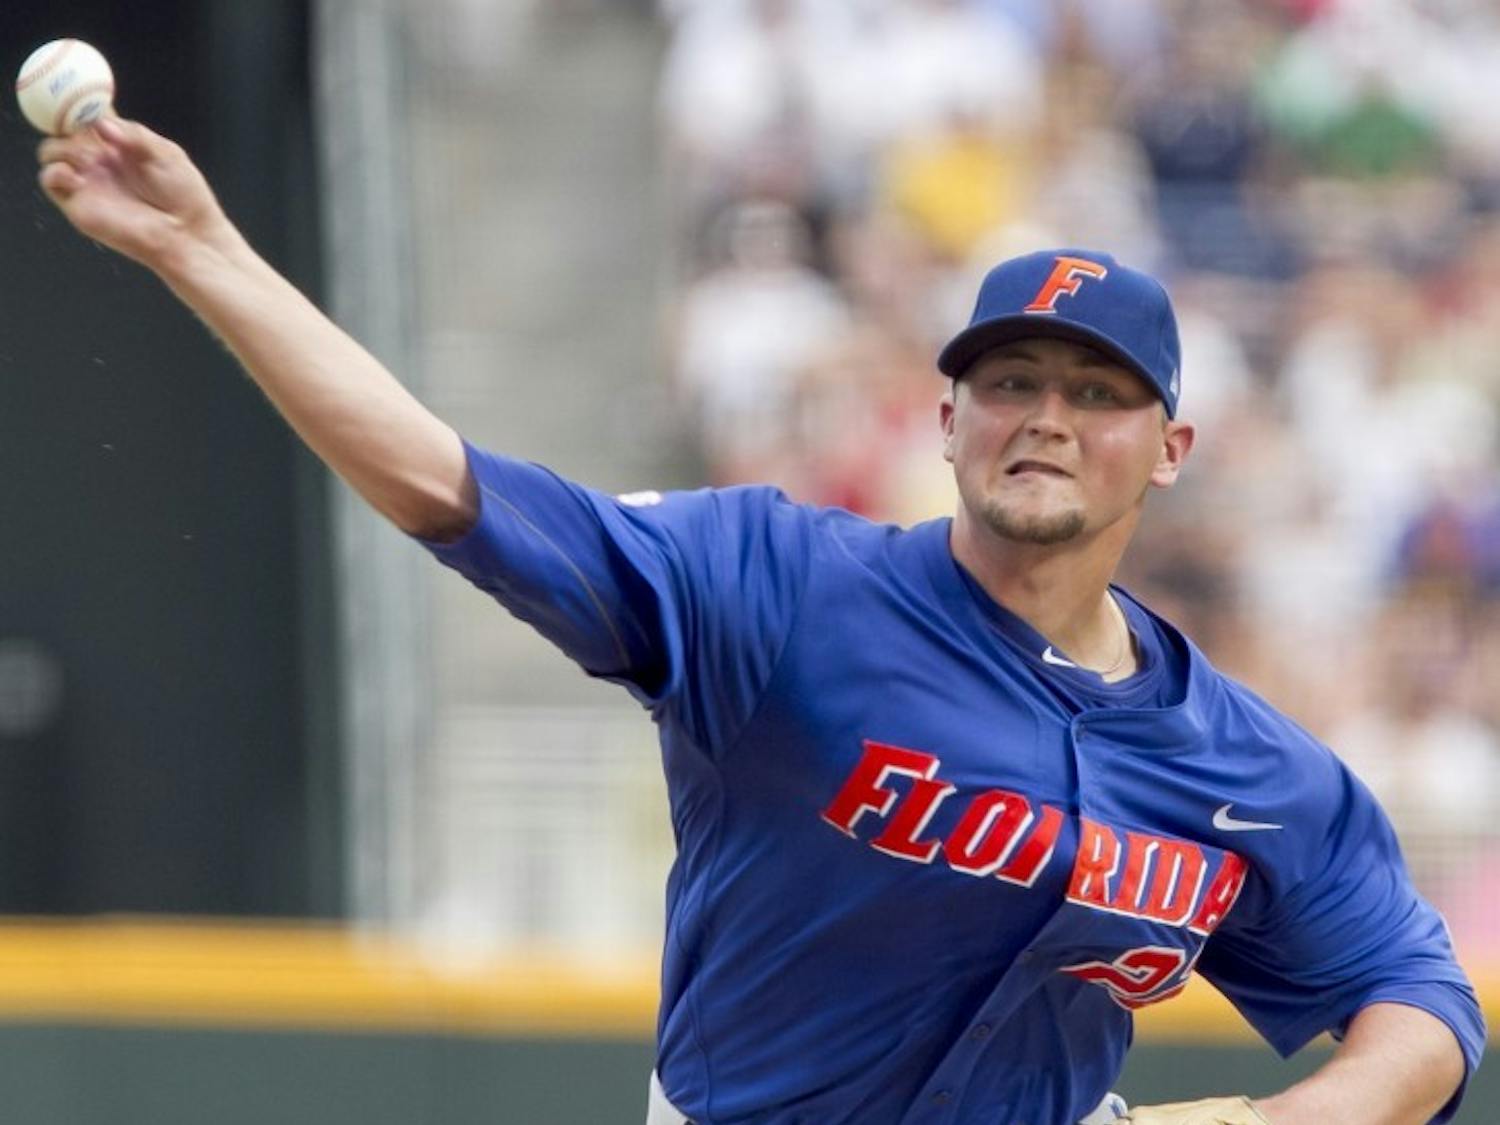 Despite his youth, Florida freshman Karsten Whitson (8-0, 2.43 ERA) has flummoxed hitters all season. The powerful right-hander was a key caveat in Florida 3-1 win over Vanderbilt Tuesday in the weather-suspended contest at the College World Series.&nbsp;